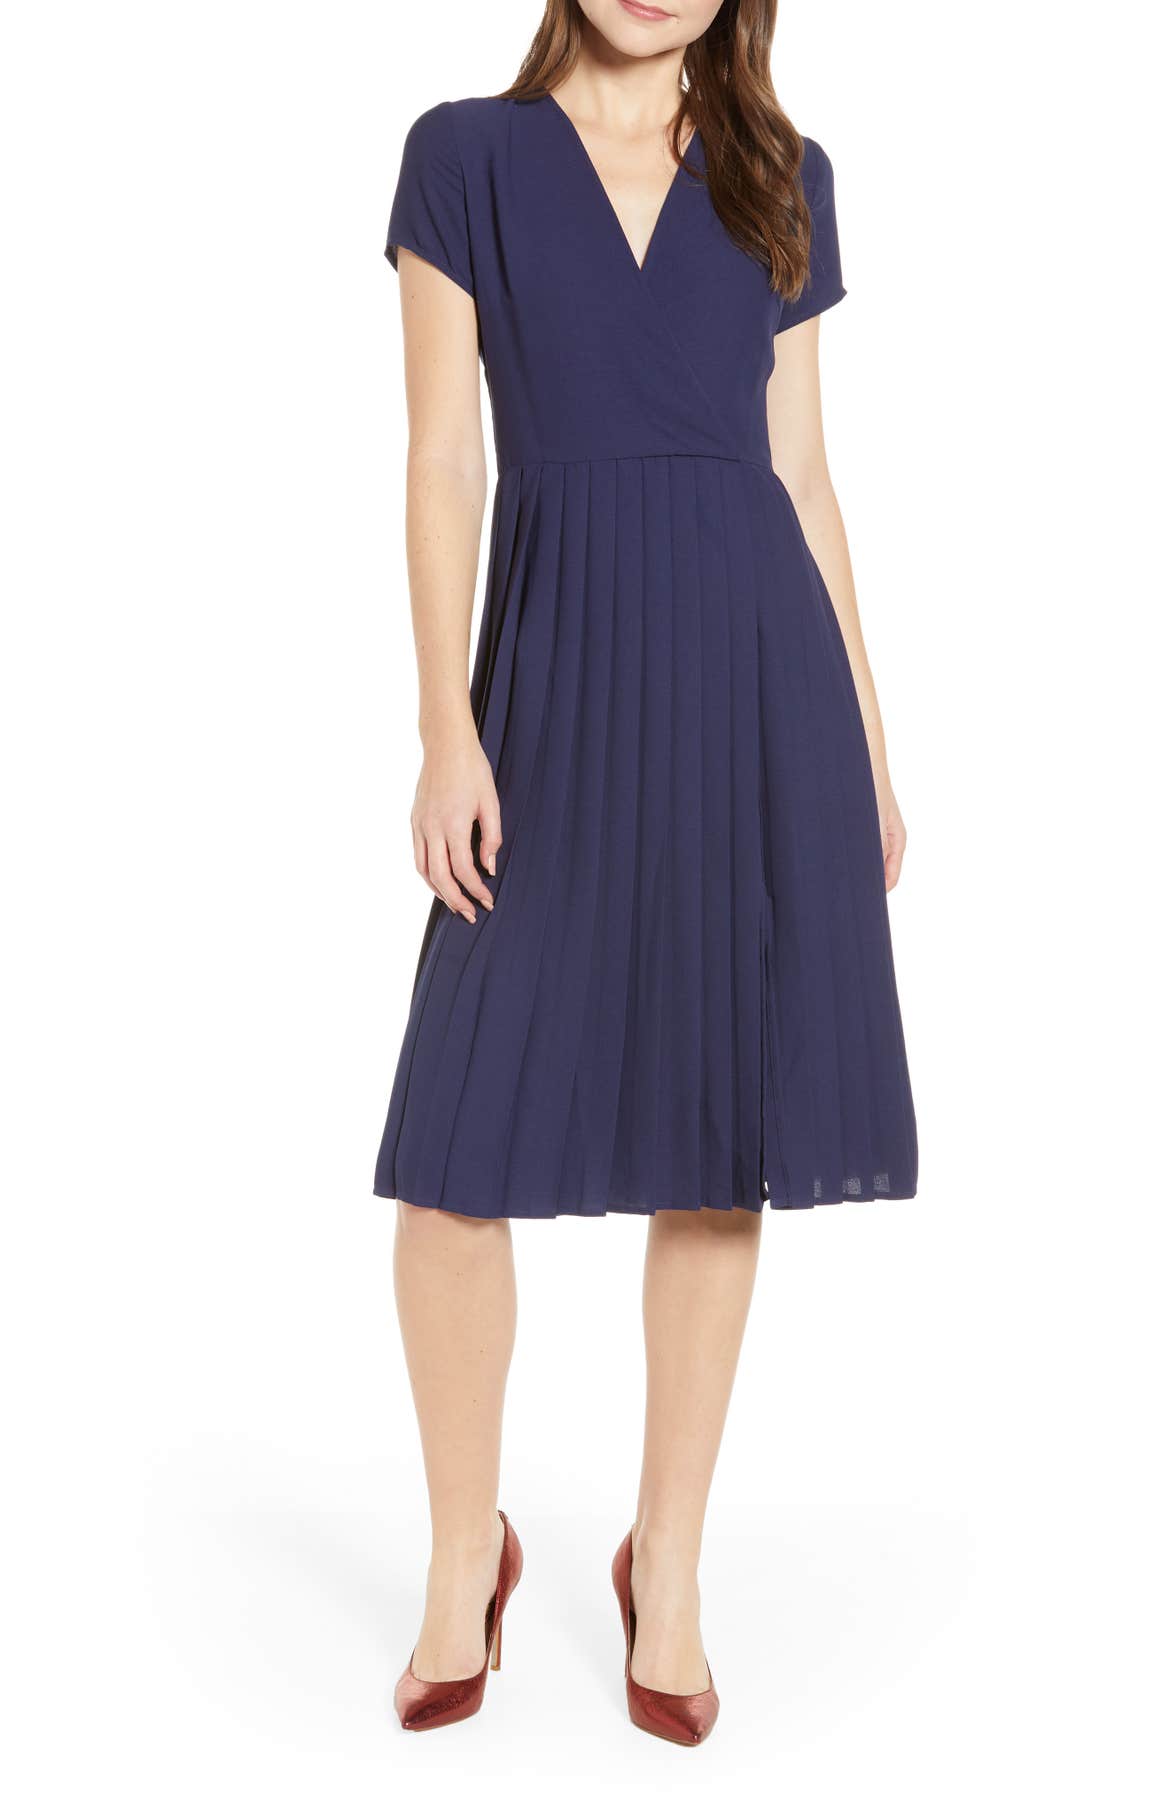 LEITH Pleated Surplice Dress, Main, color, NAVY PEACOAT